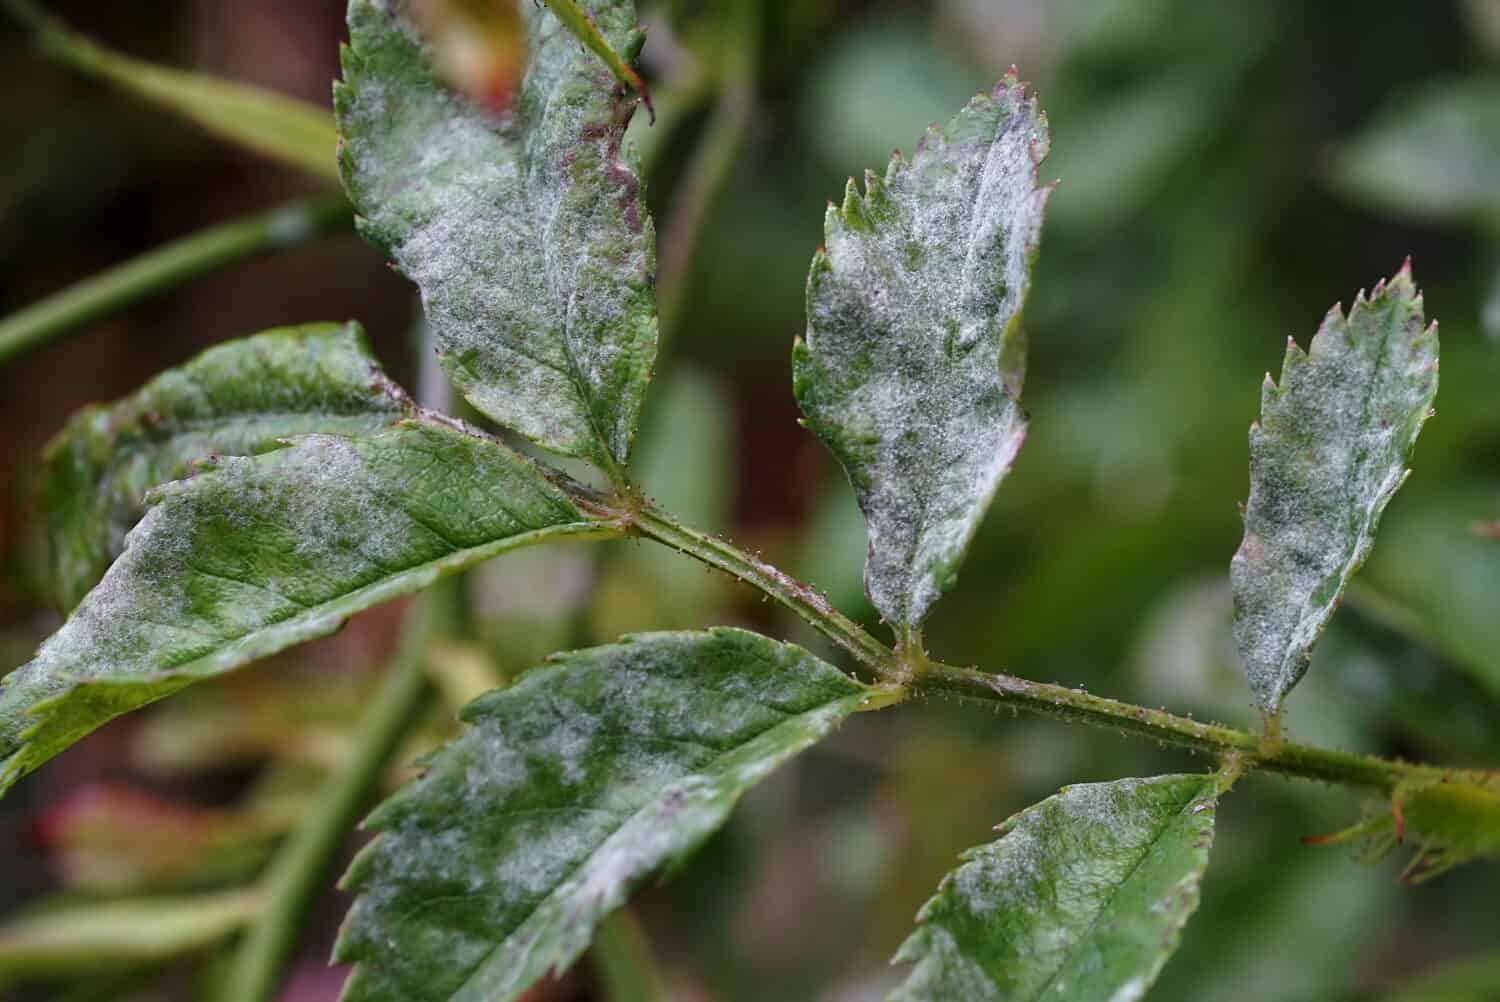 White coating (mold) on the leaves of a sick rose